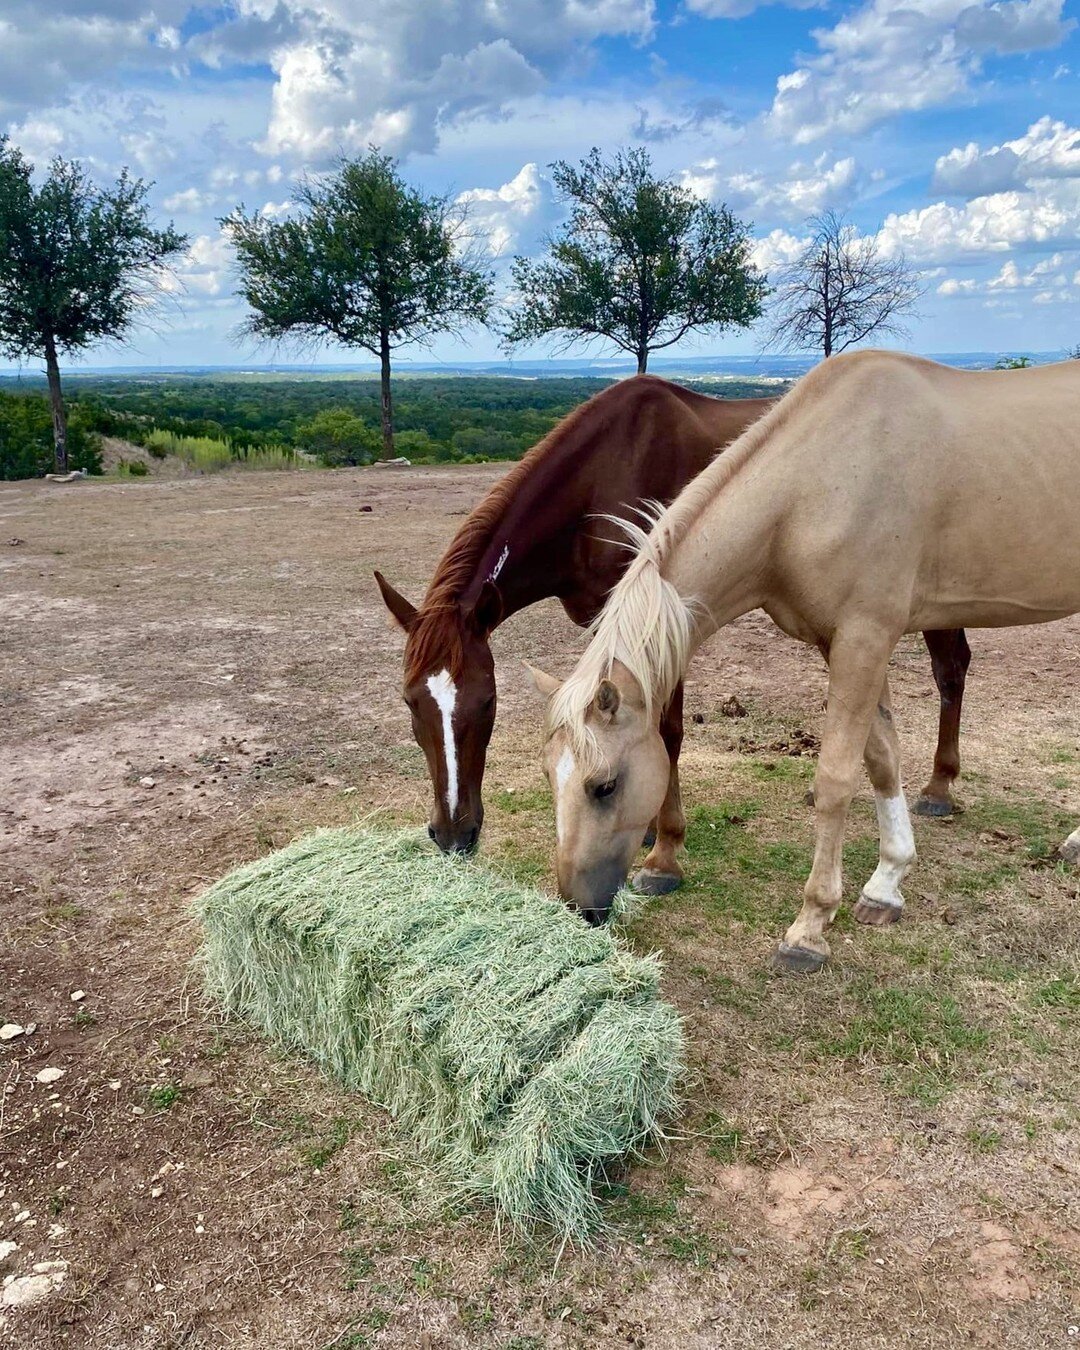 We had some great questions about two of our new arrivals (Surprise! We have MORE introductions coming!!) ❤️

THEY WERE EATING SAND??!! - Yes! Both were full of sand and unable to absorb calories &amp; nutrients. Horses can ingest sand in a couple of